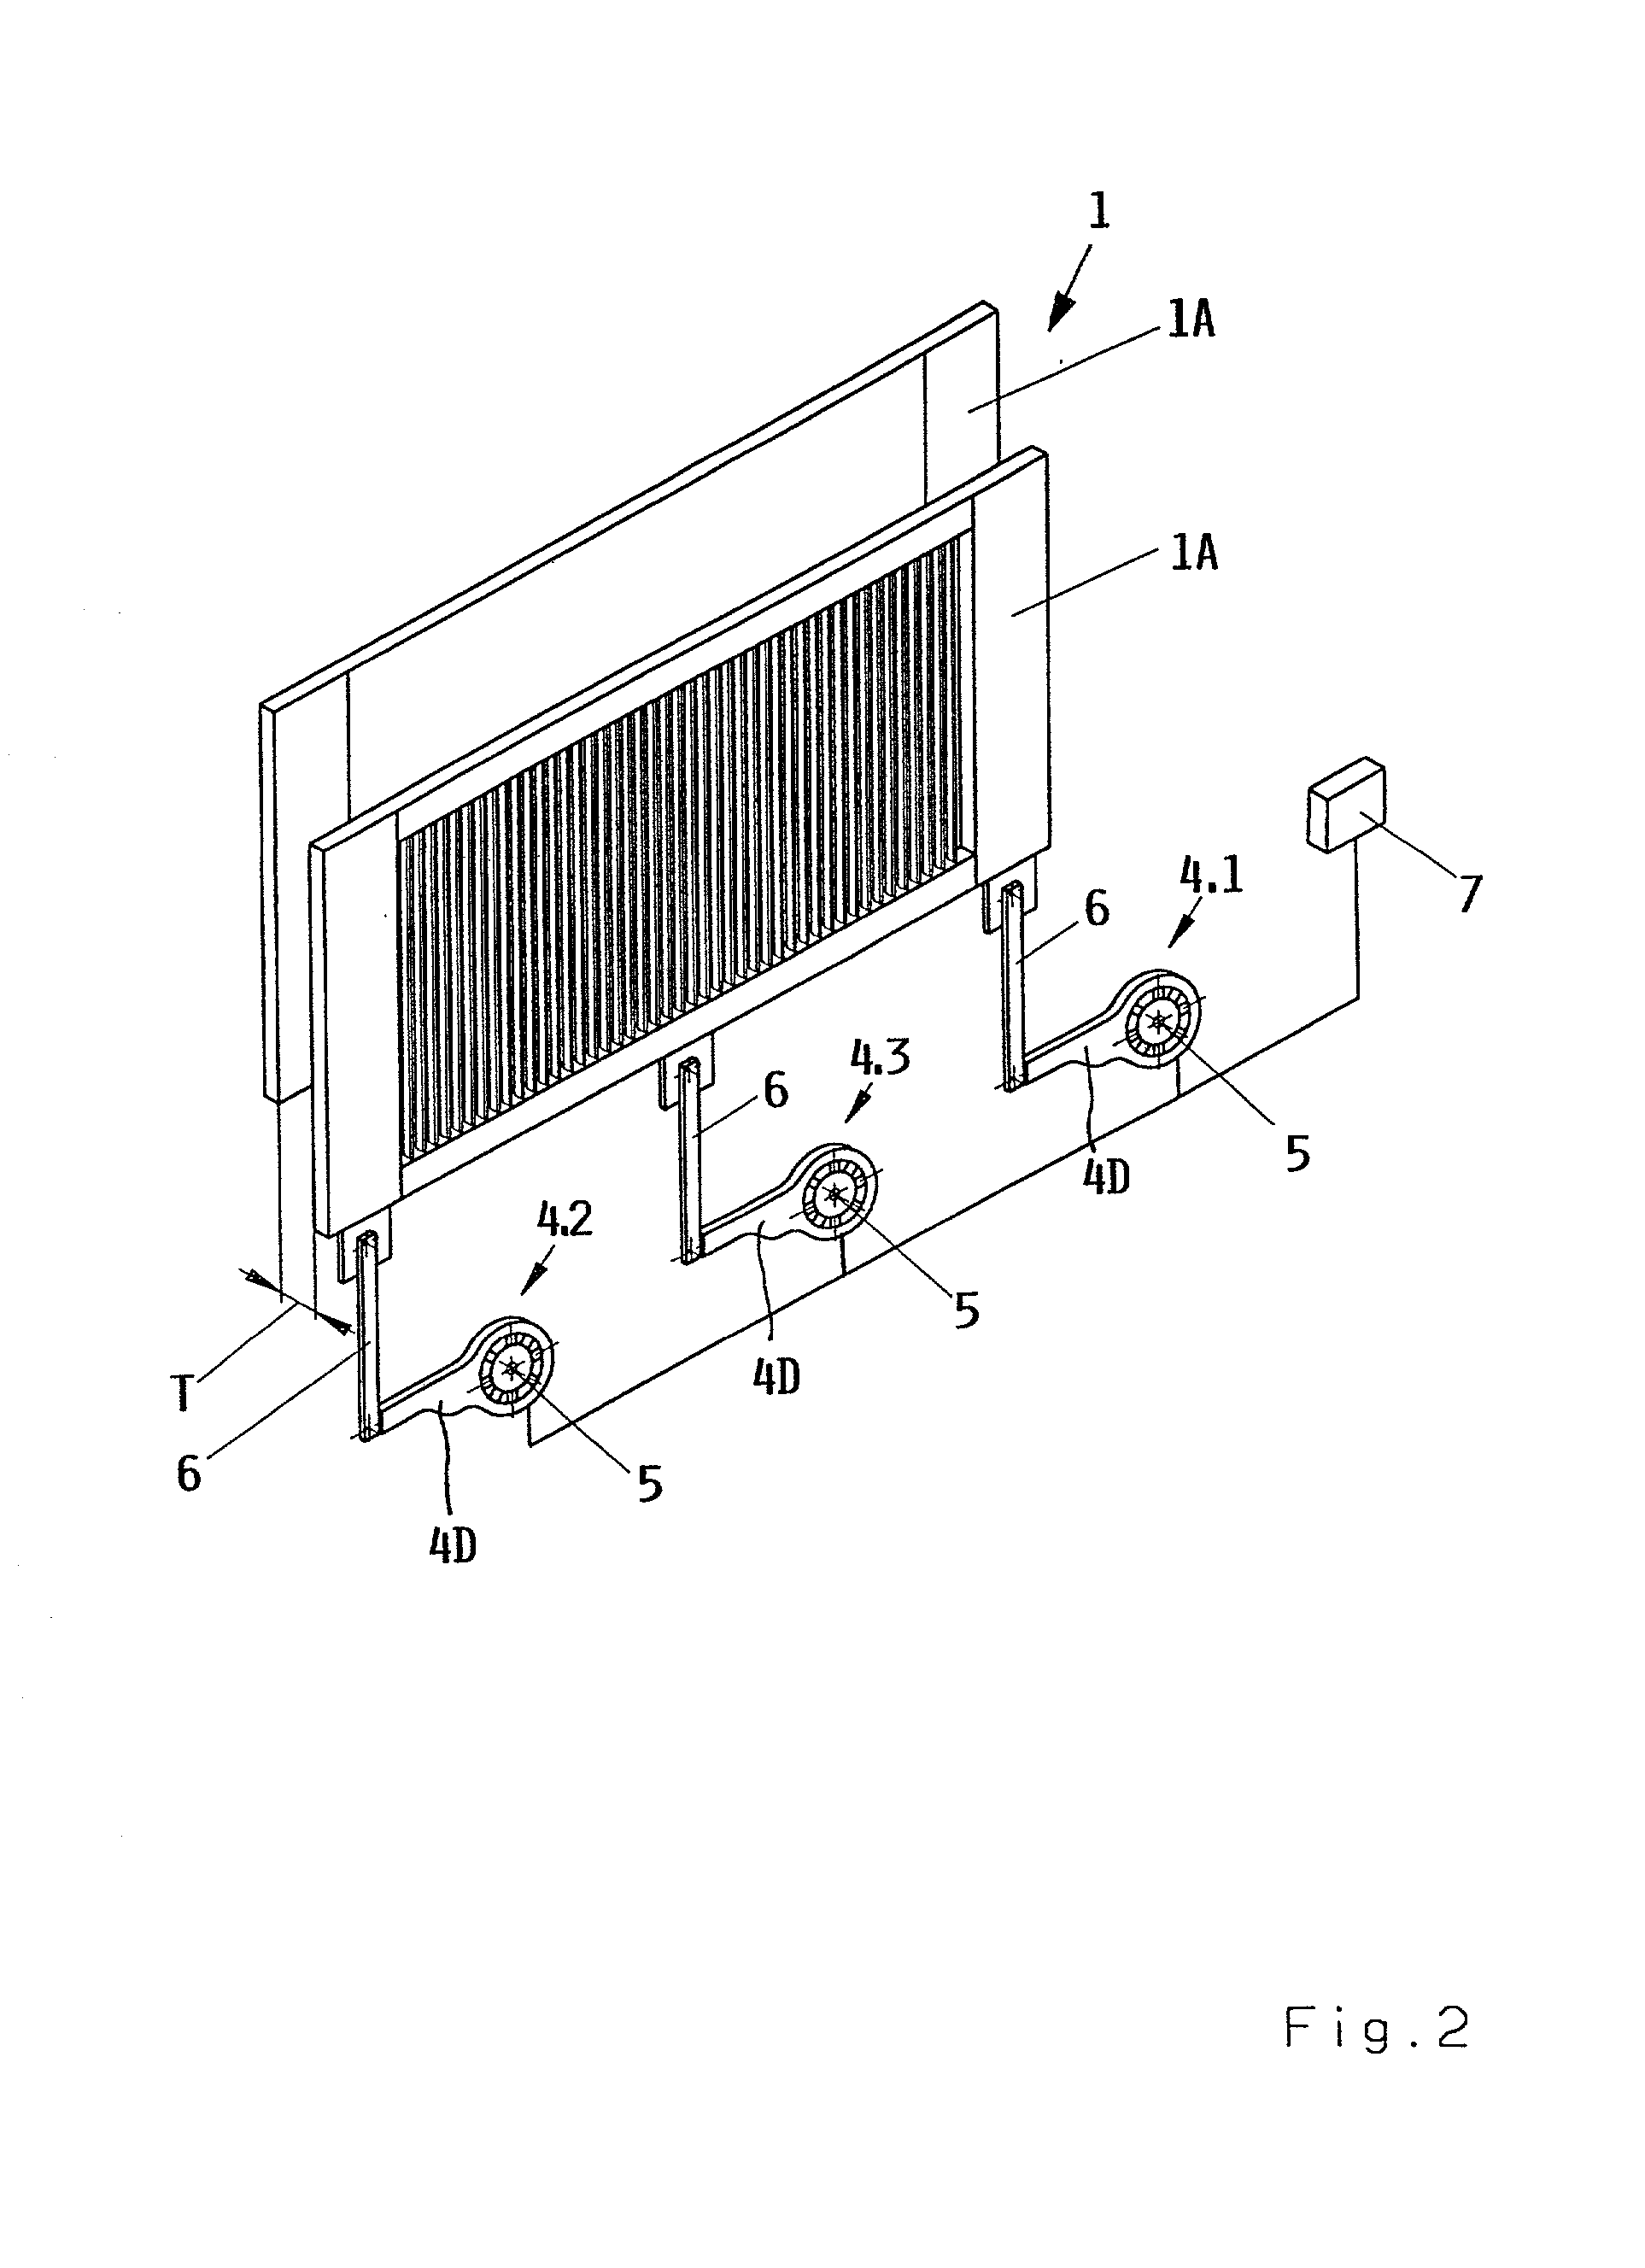 Drive mechanism for shed forming components of a loom